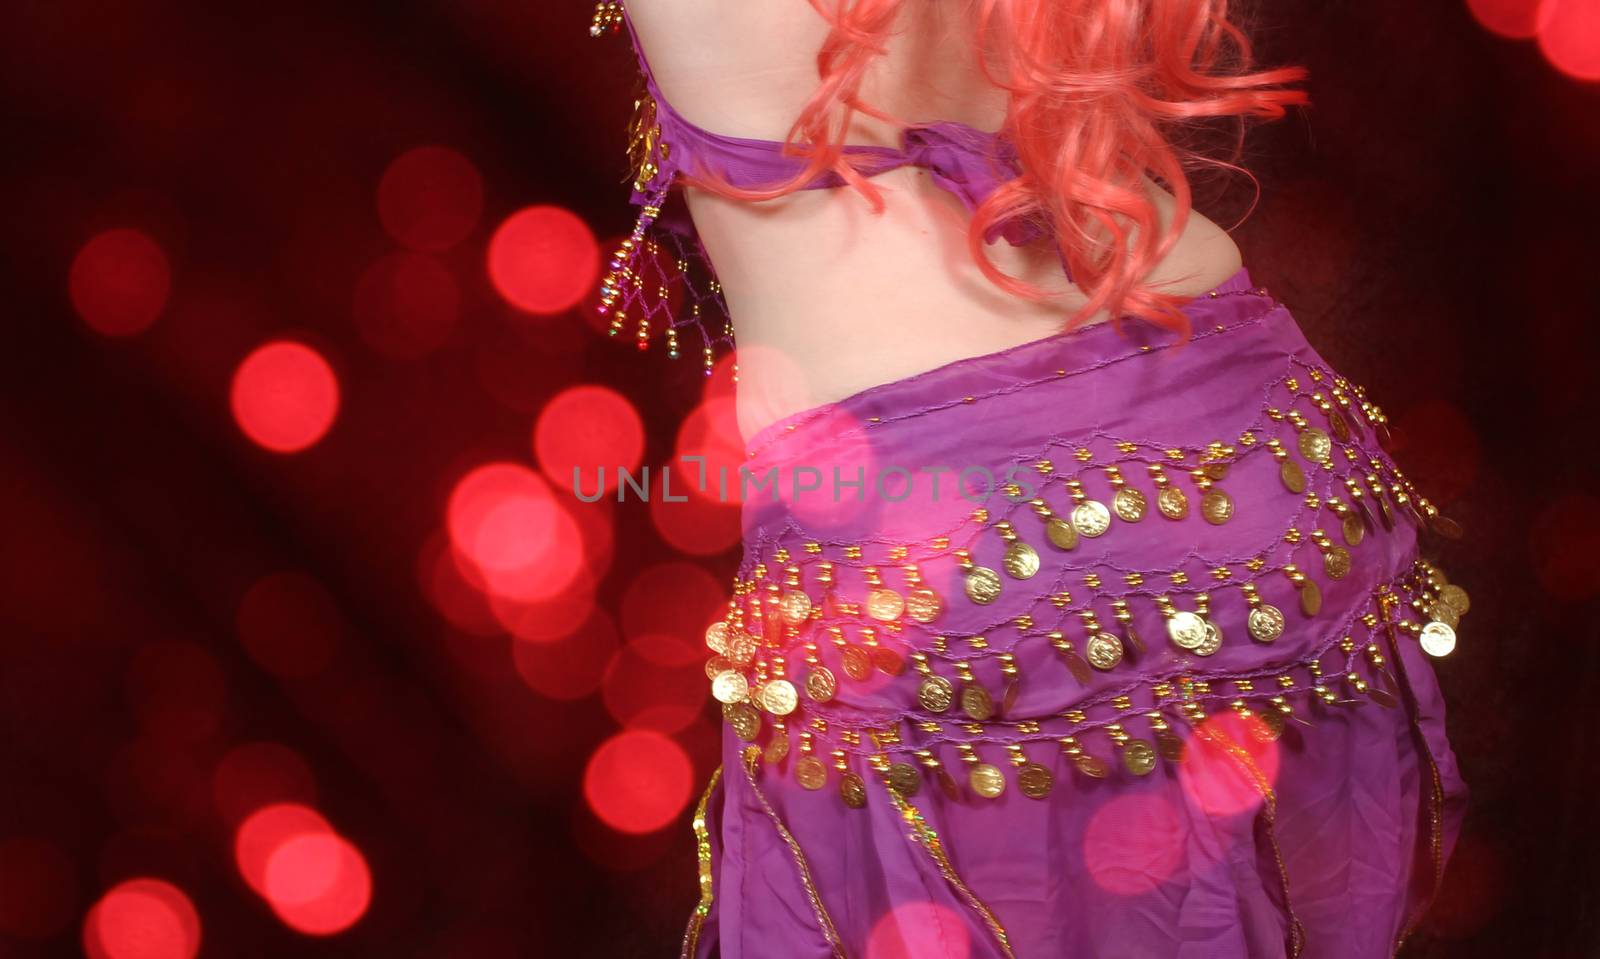 Motion Blur Belly Dancer Close-up by Marti157900